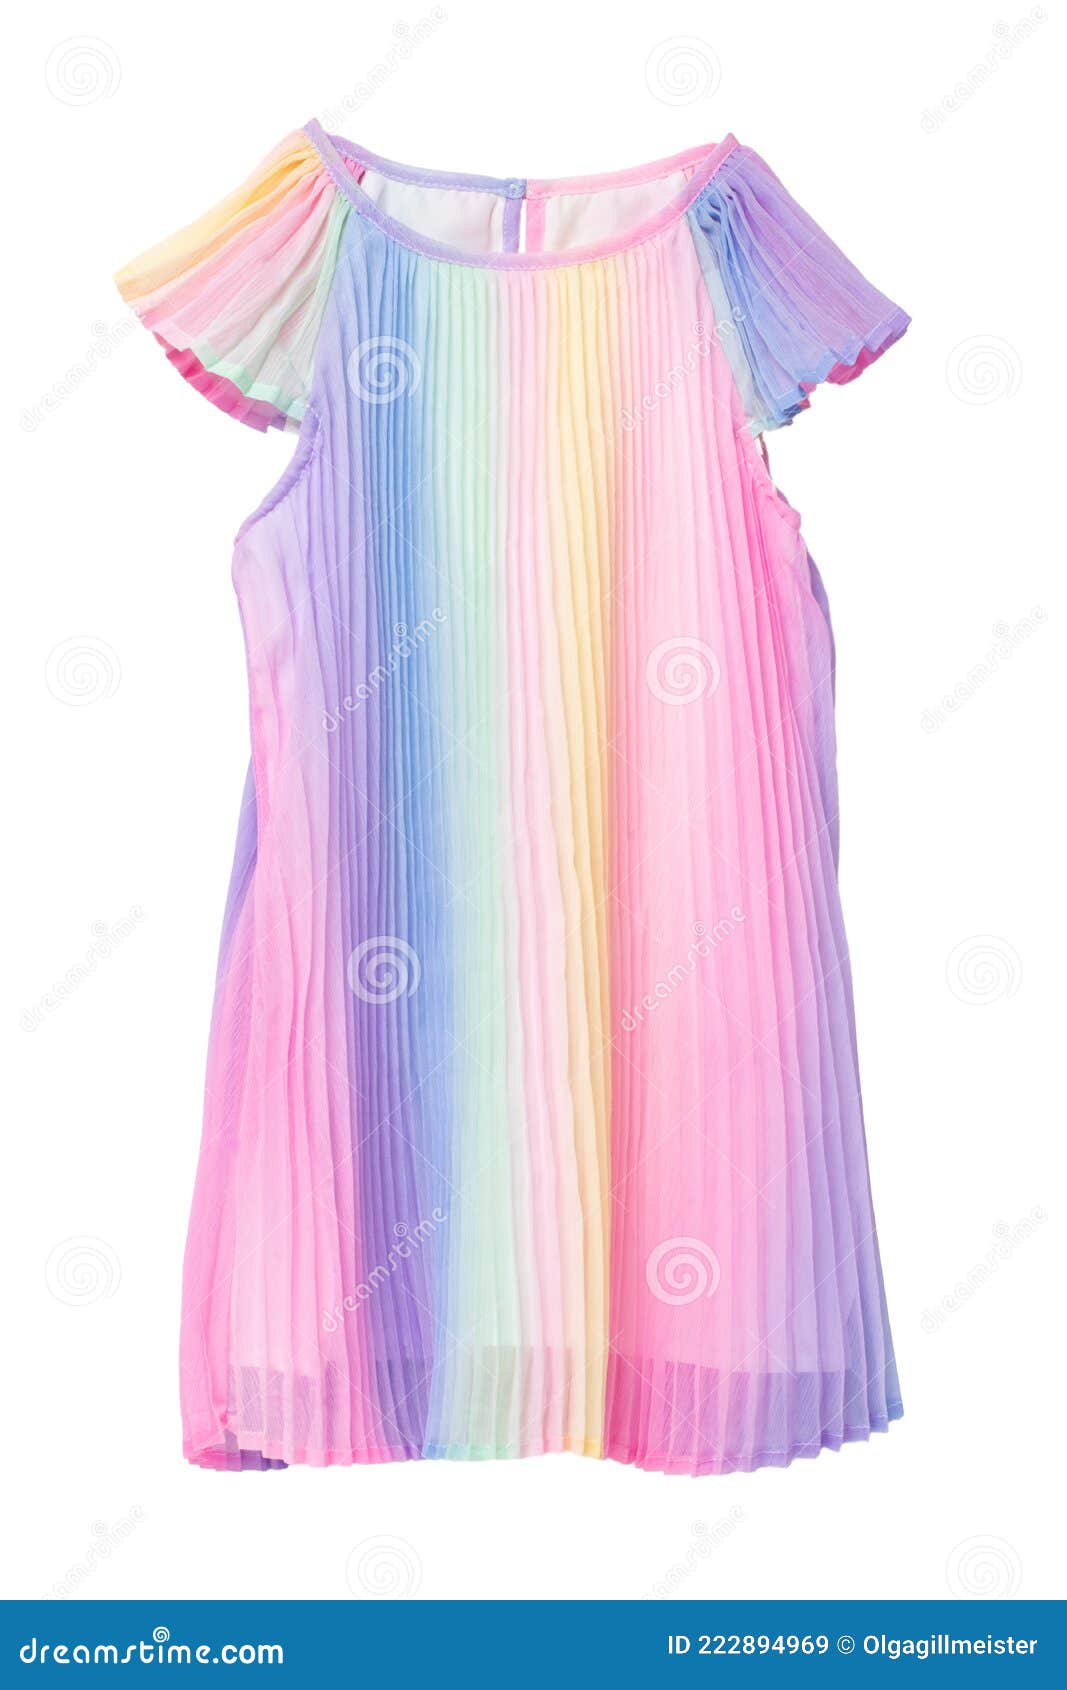 Premium Photo | A woman in a pastel rainbow dress stands in front of a pink  backdrop.